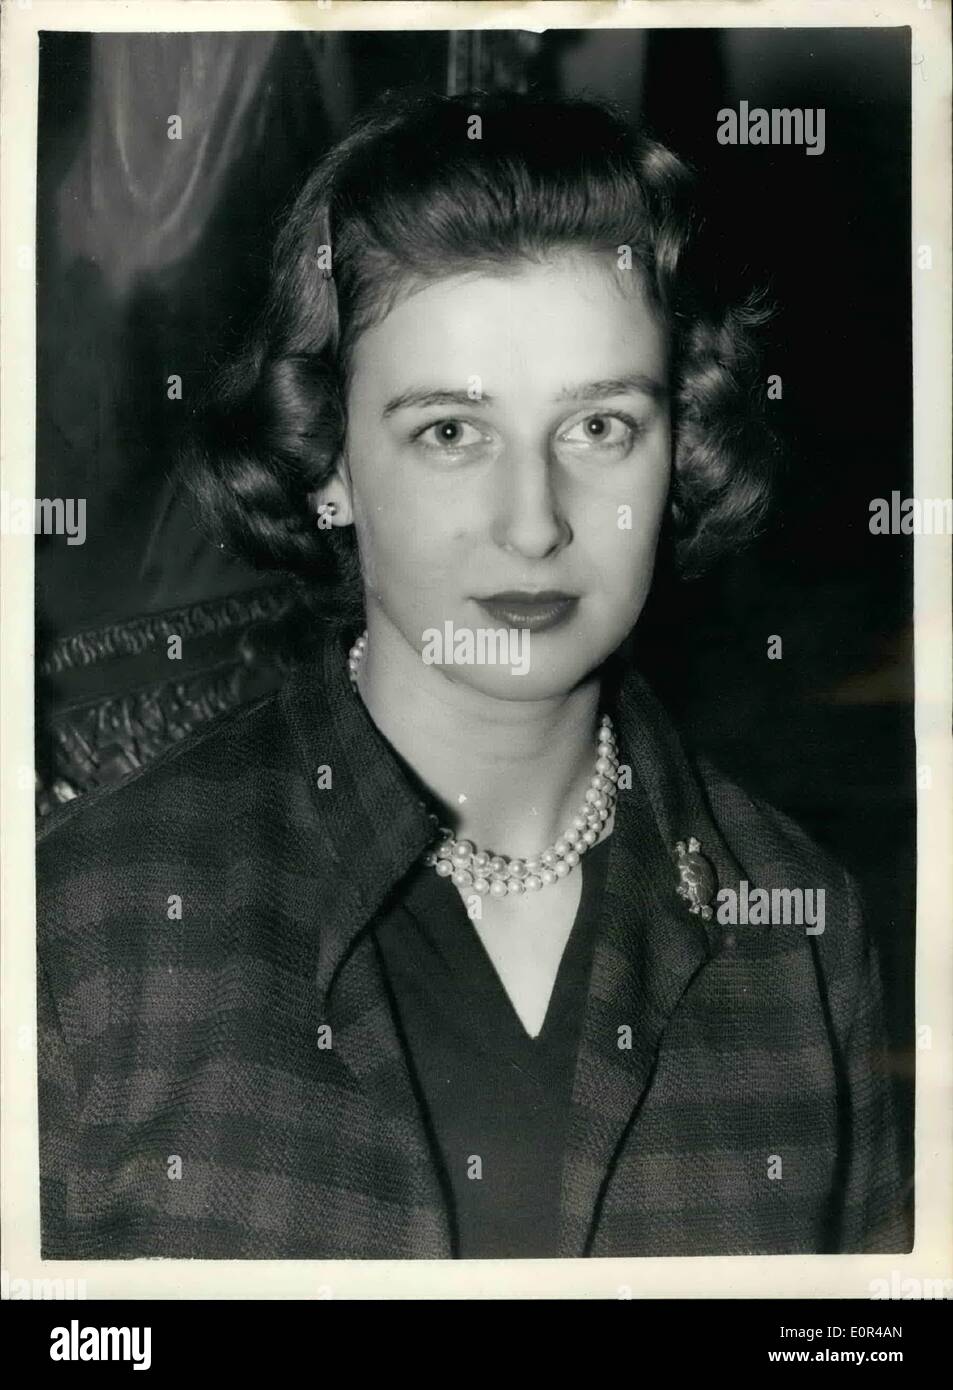 Dec. 12, 1957 - Princess Alexandra 21 on Christmas Day; Princess Alexandra of Kent is shown at Kensington Palace, London, December 18. The Picture was made in connection with the Princess 21st birthday, which she celebrates on December 25th. Stock Photo